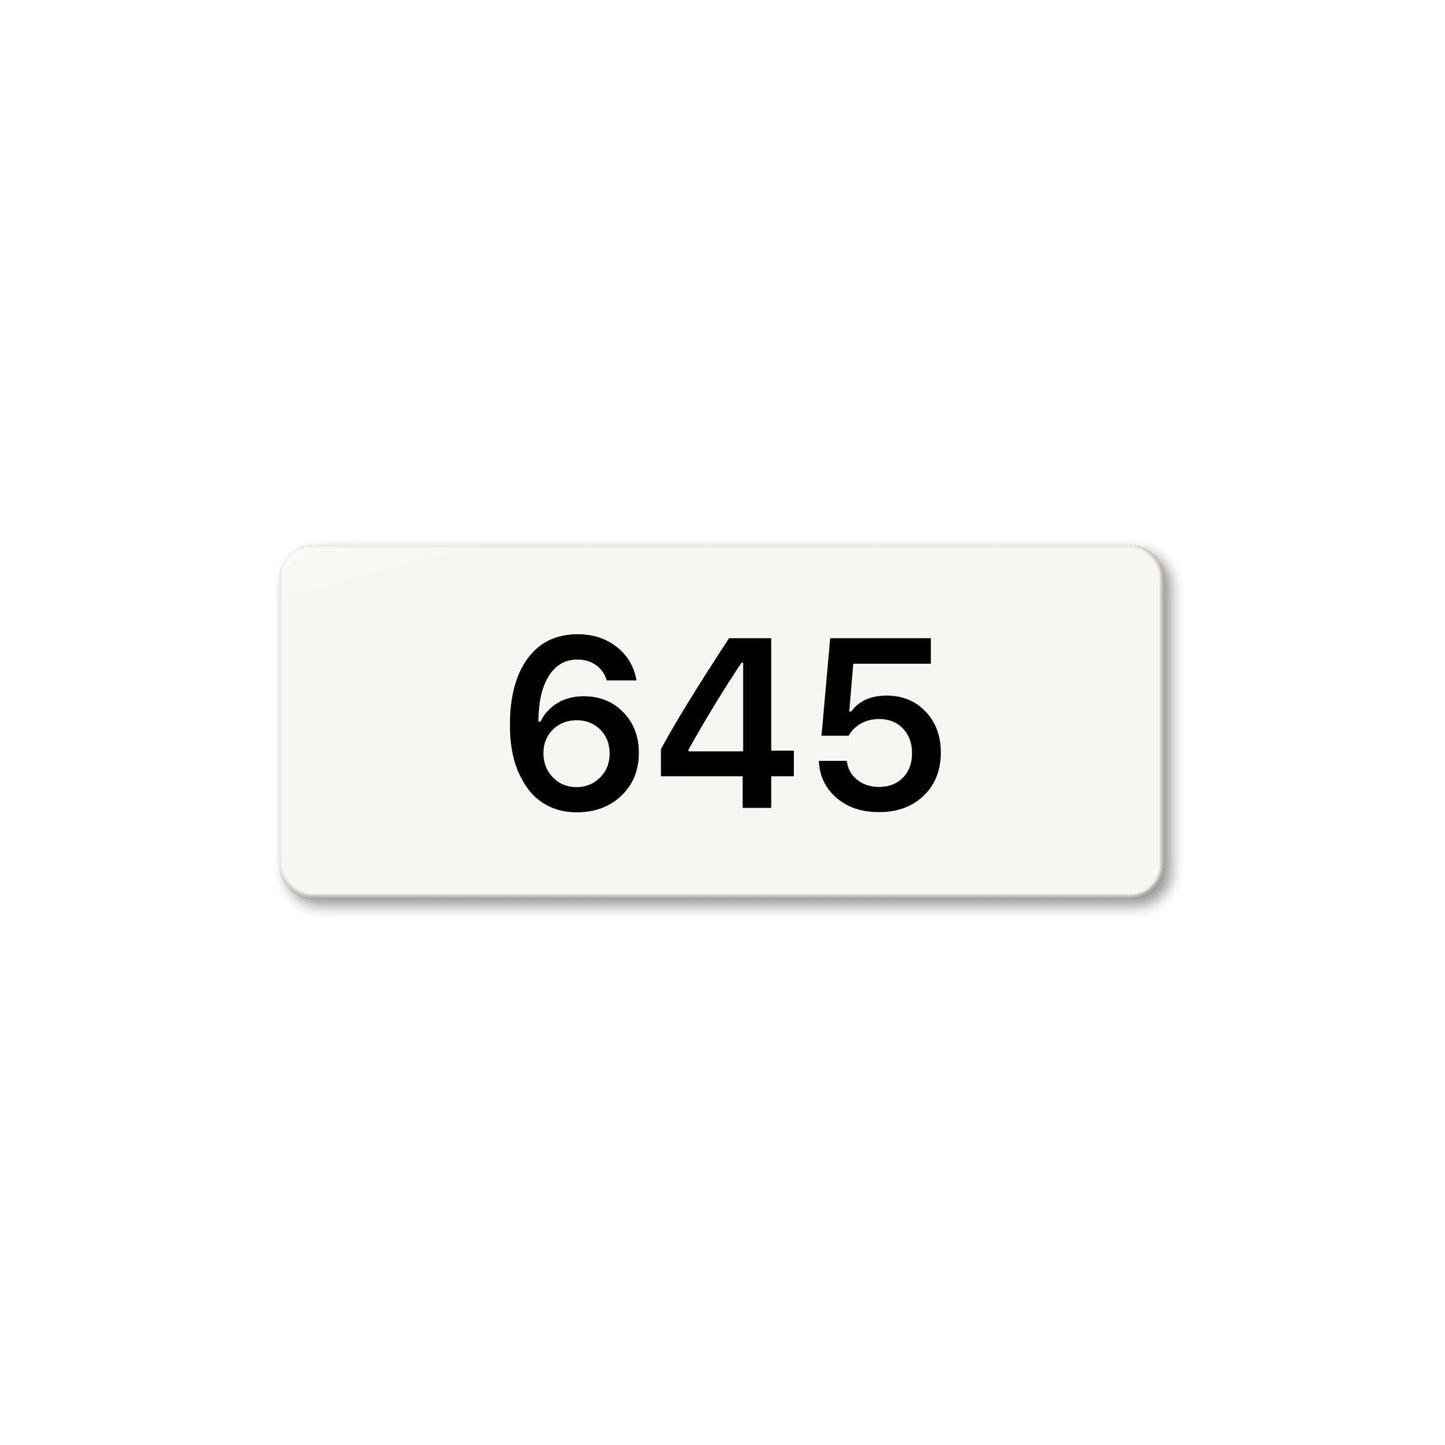 Numeral 645